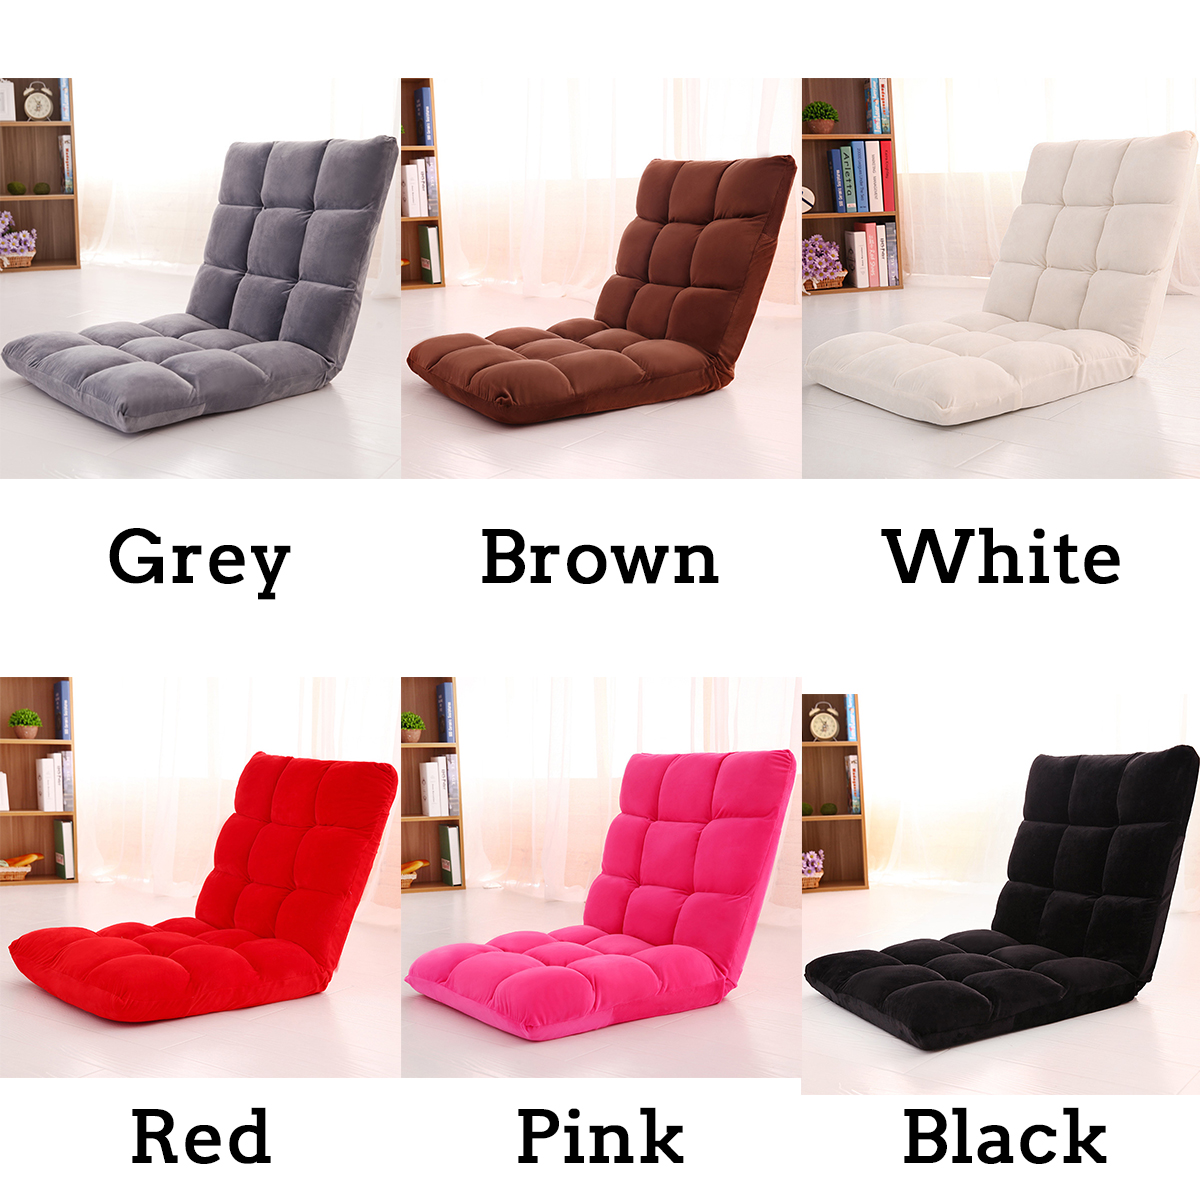 Adjustable Lazy Sofa Cushioned Floor Lounge Chair Living Room Leisure Chaise Chair 62